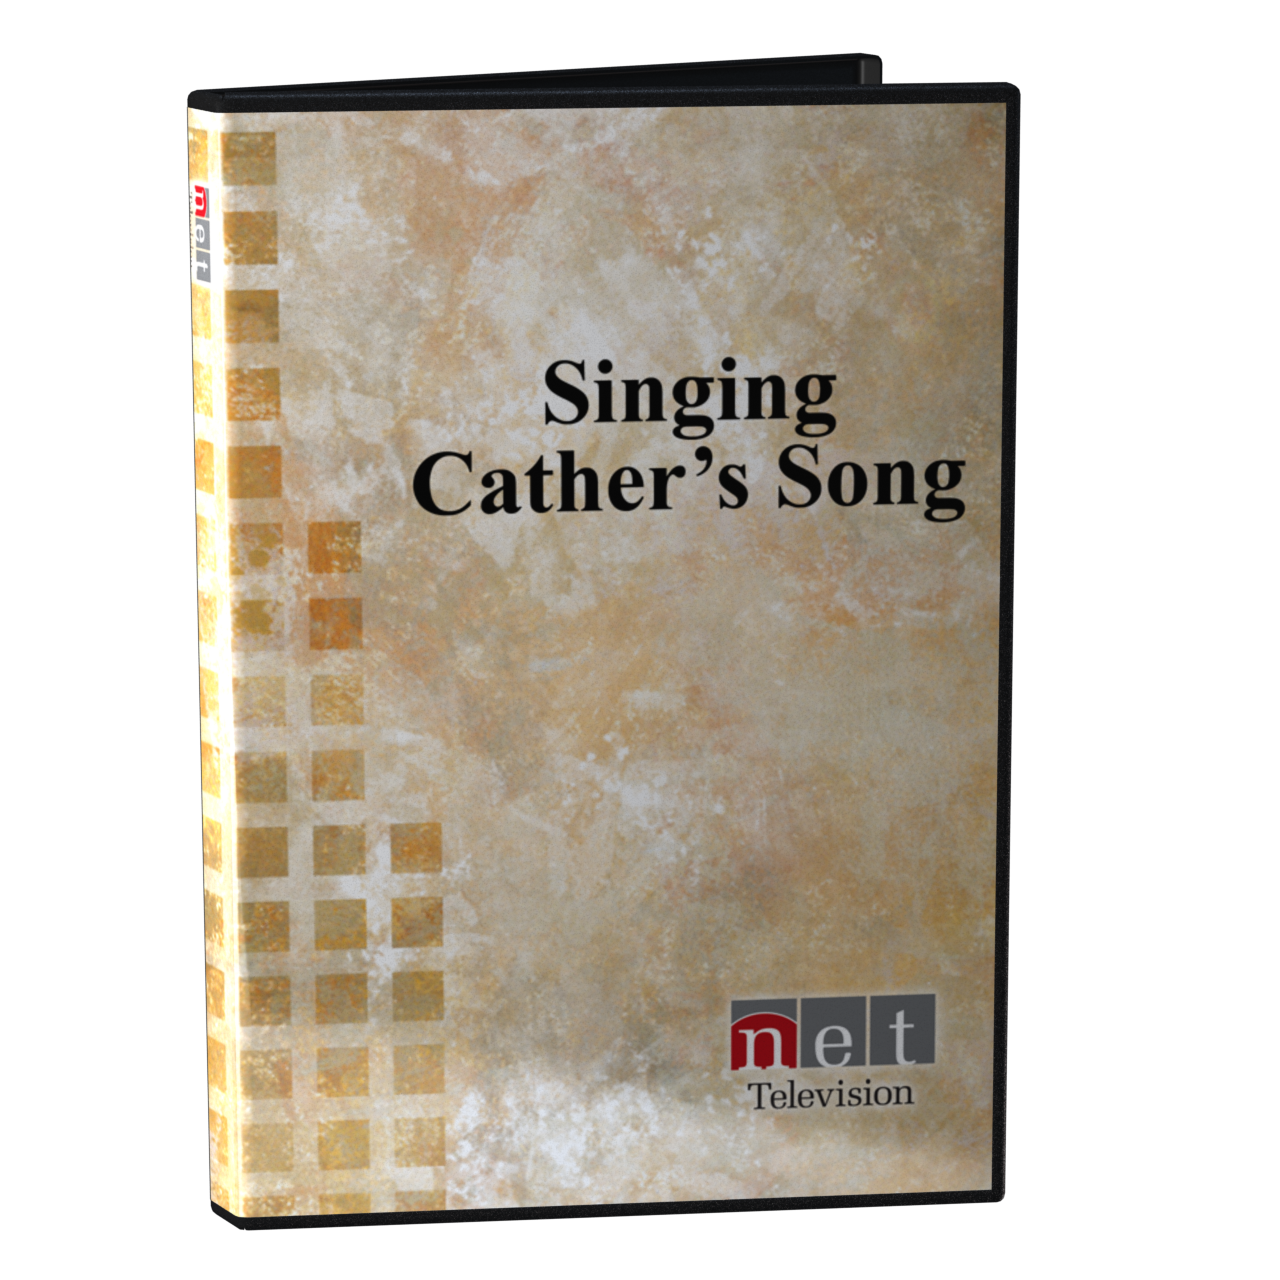 Singing Cather's Song